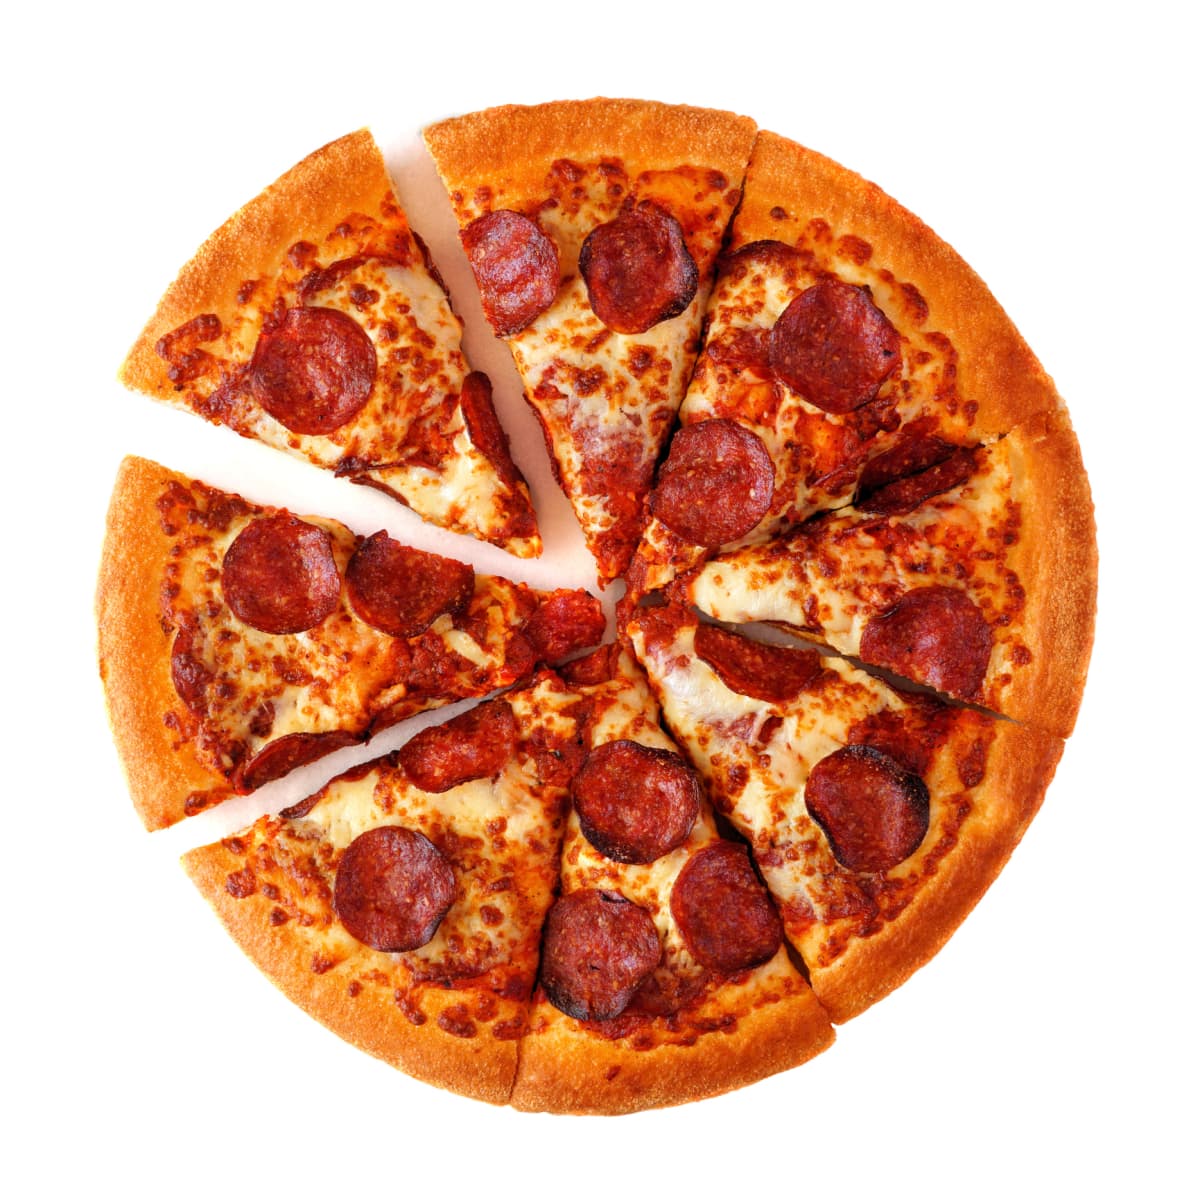 Pepperoni pizza cut into slices